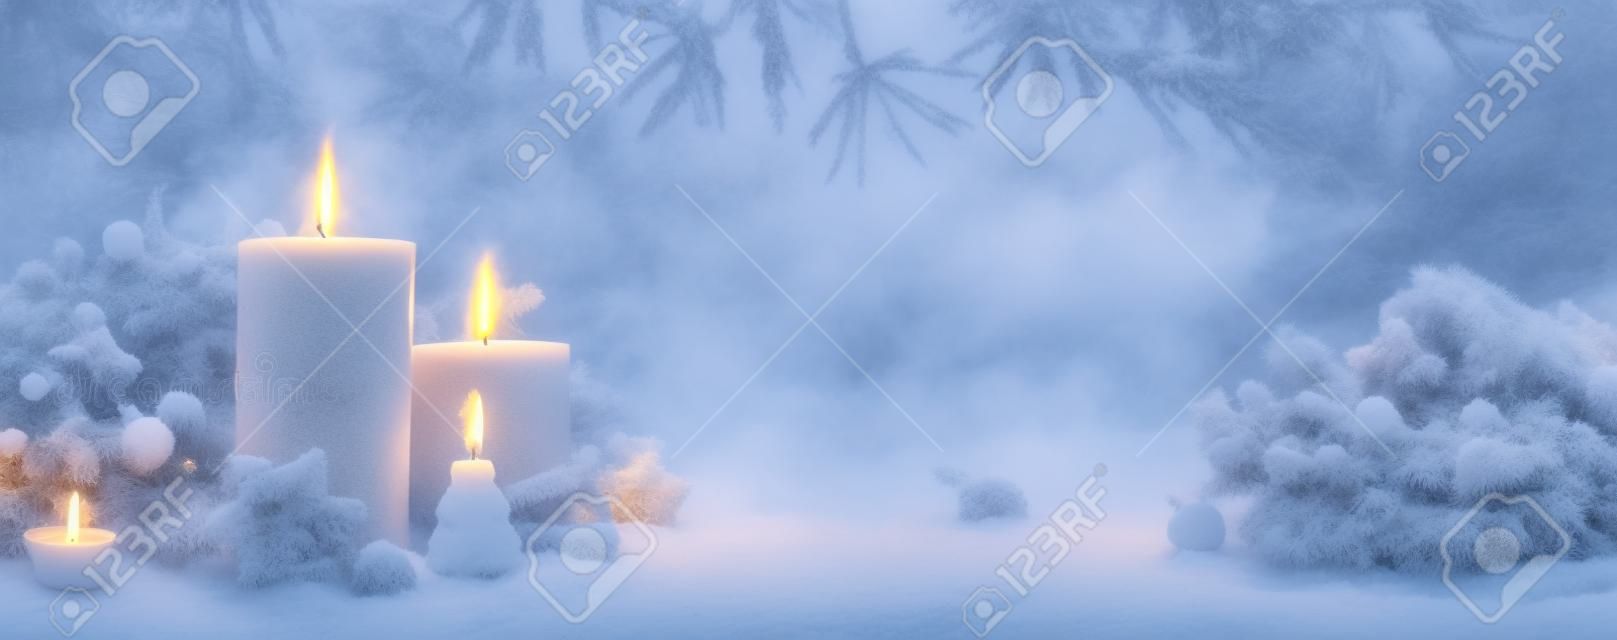 Winter Forest Landscape With Burning Candles